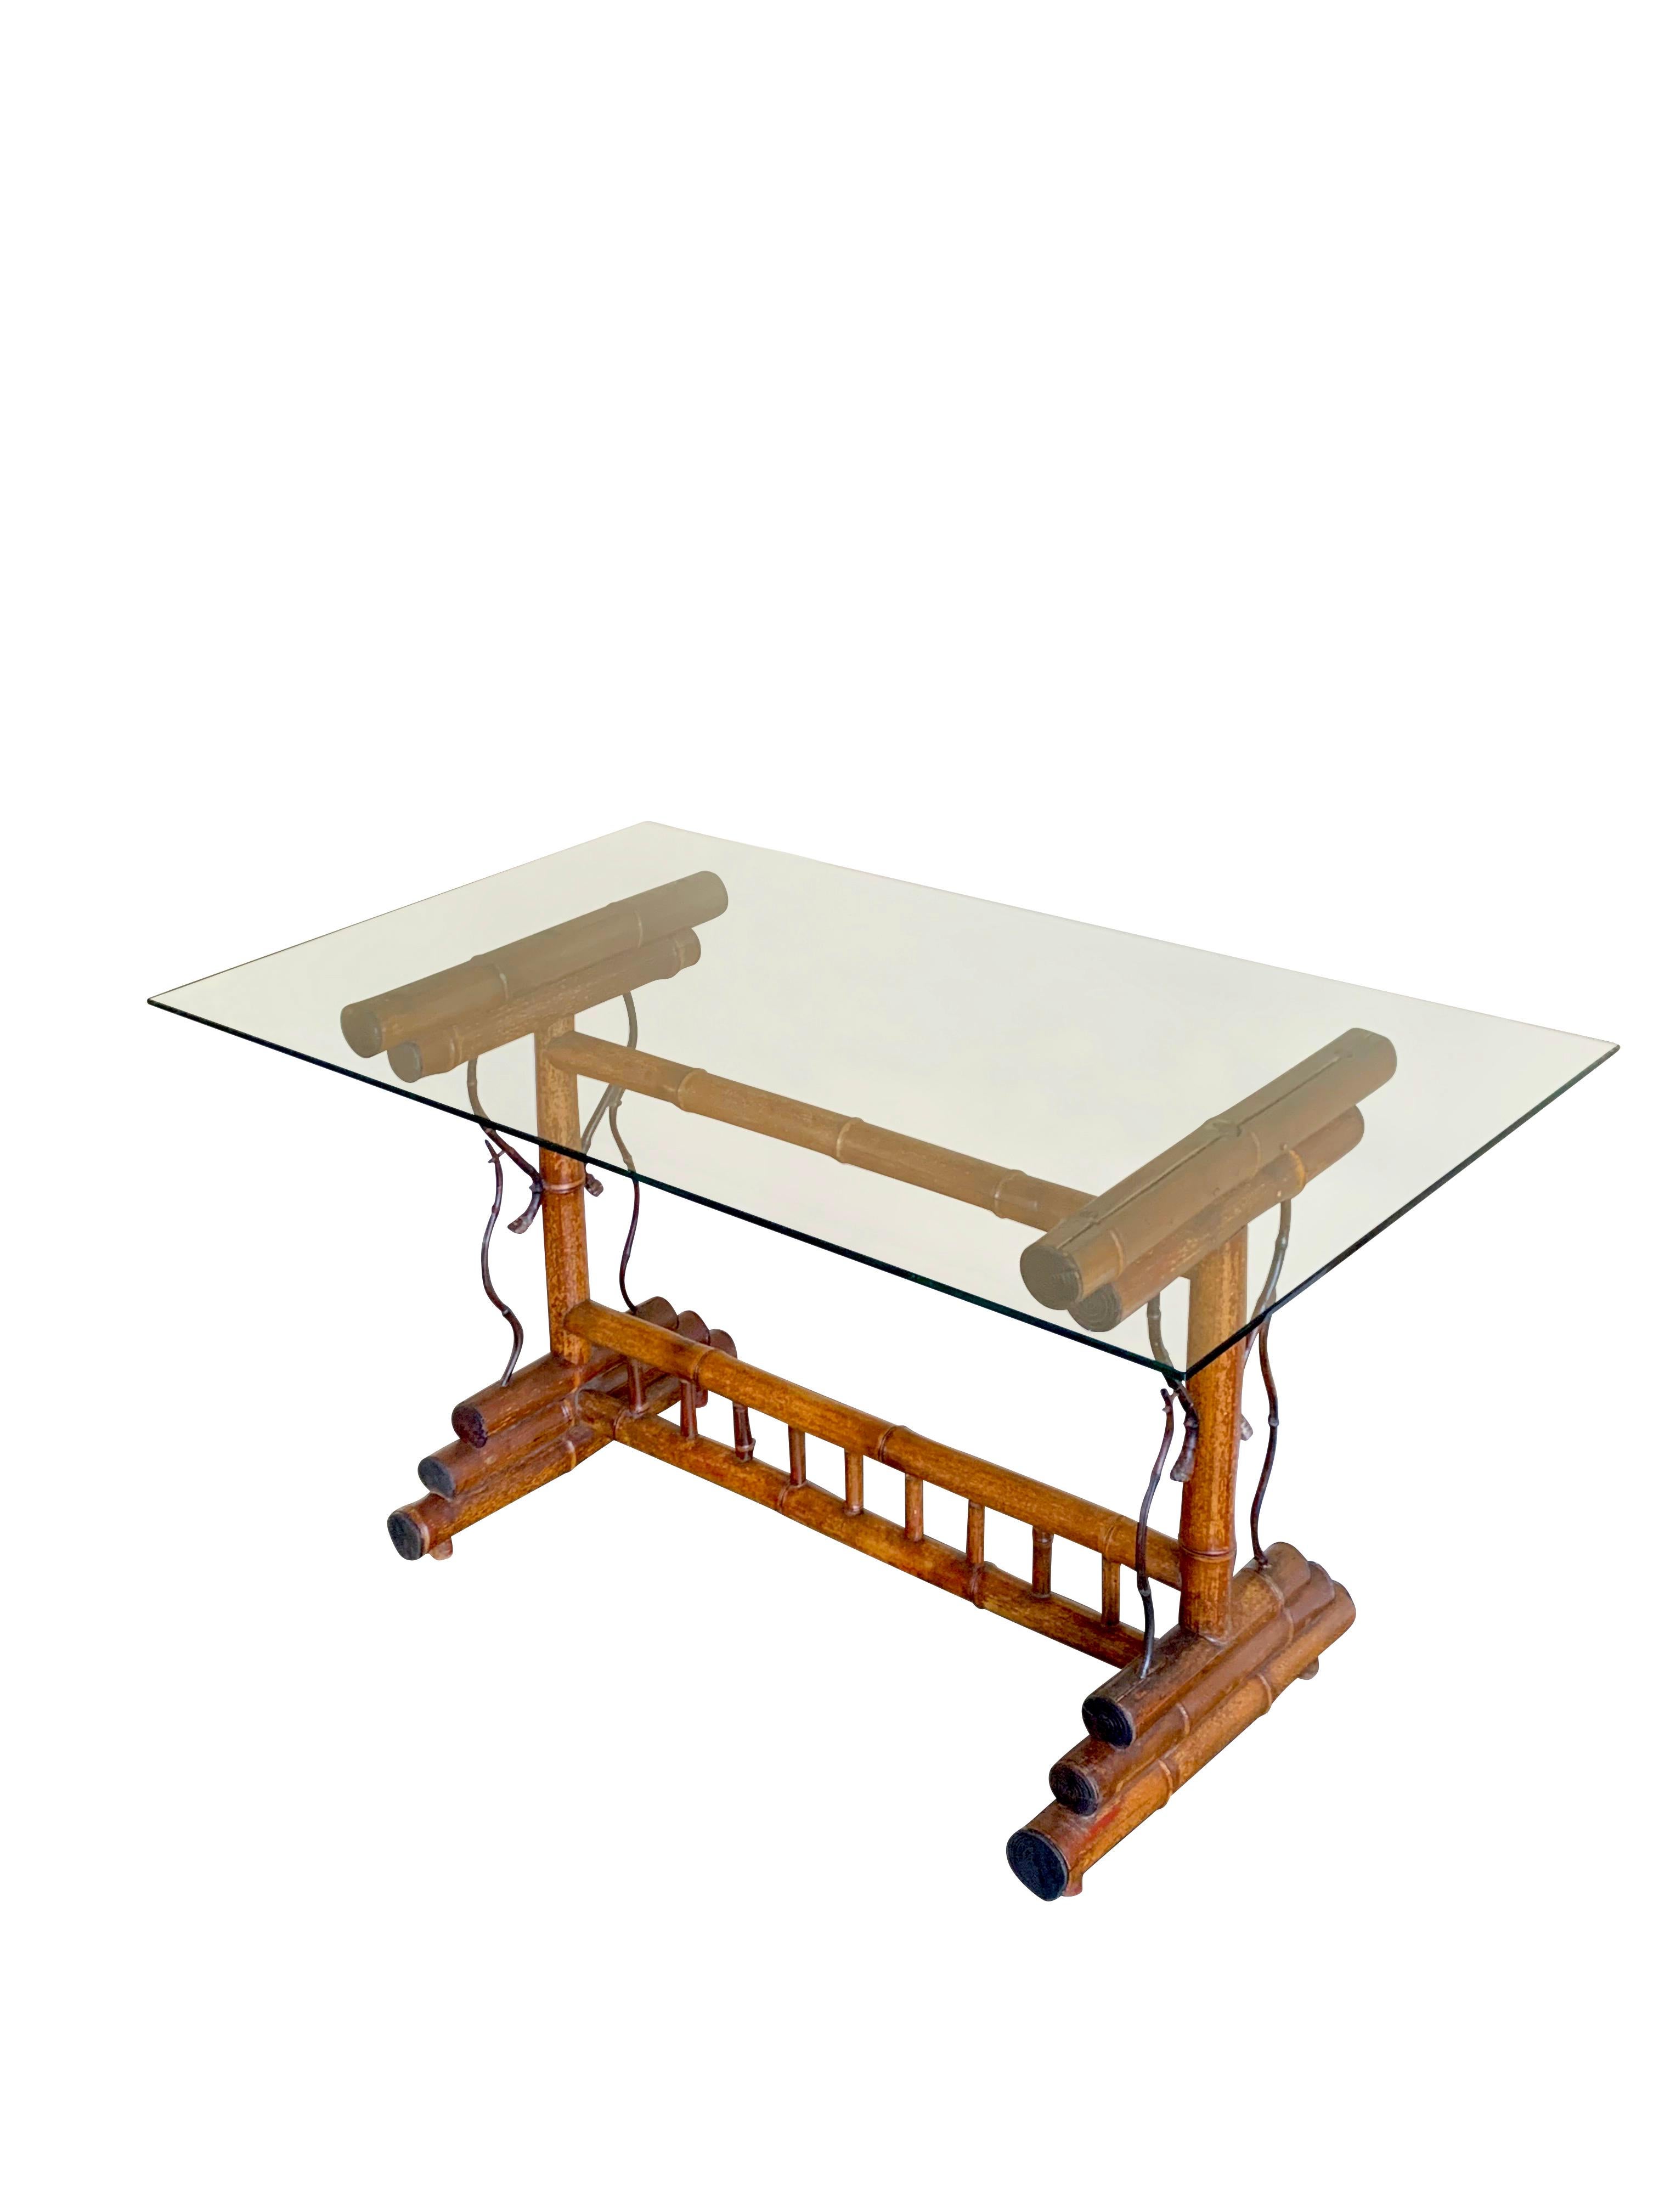 1940s French bamboo base writing desk with glass top.
The desk has been recently refurbished and has a beautiful natural aged patina.
Base measures 35 x 20.
Glass top measures 48 x 28.
Overall height 26.5.
Glass top has minor scratches due to